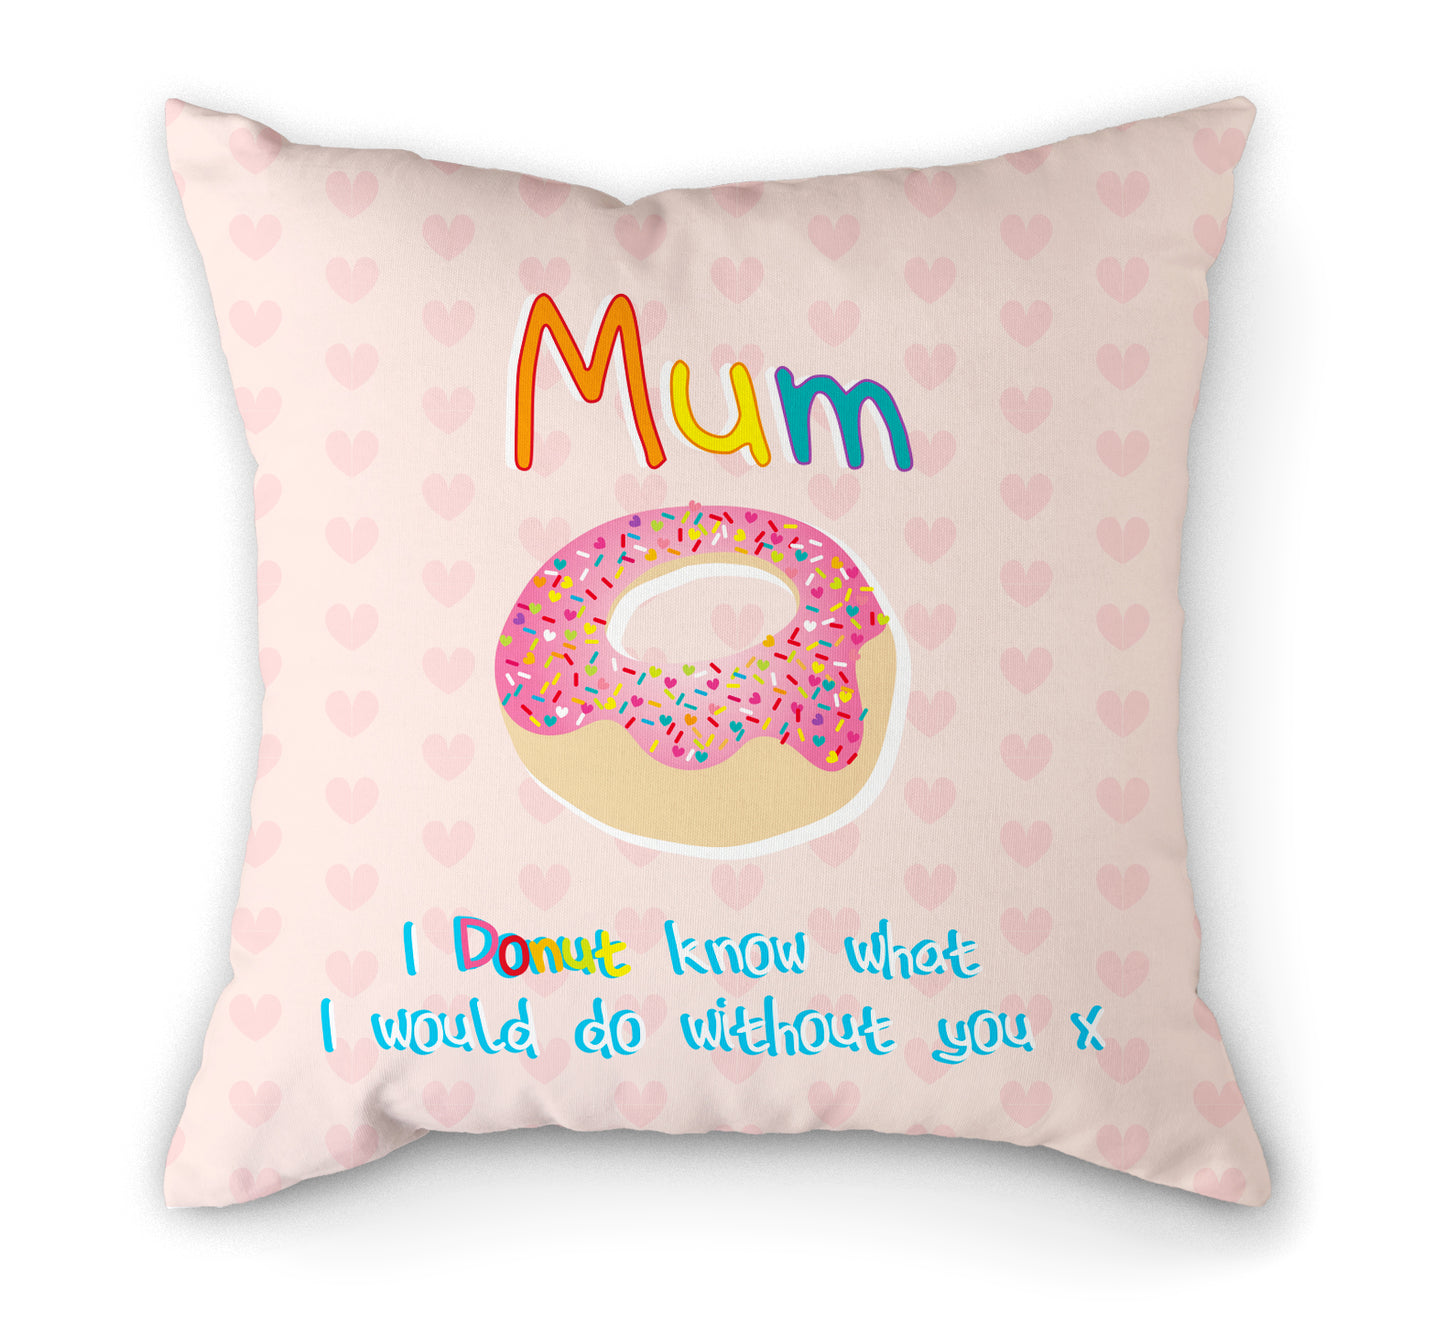 Donut, Mothers Day Cushion | 30 x 30cm | Fab Gifts. Text: Mum I donut know what I would do without you x.